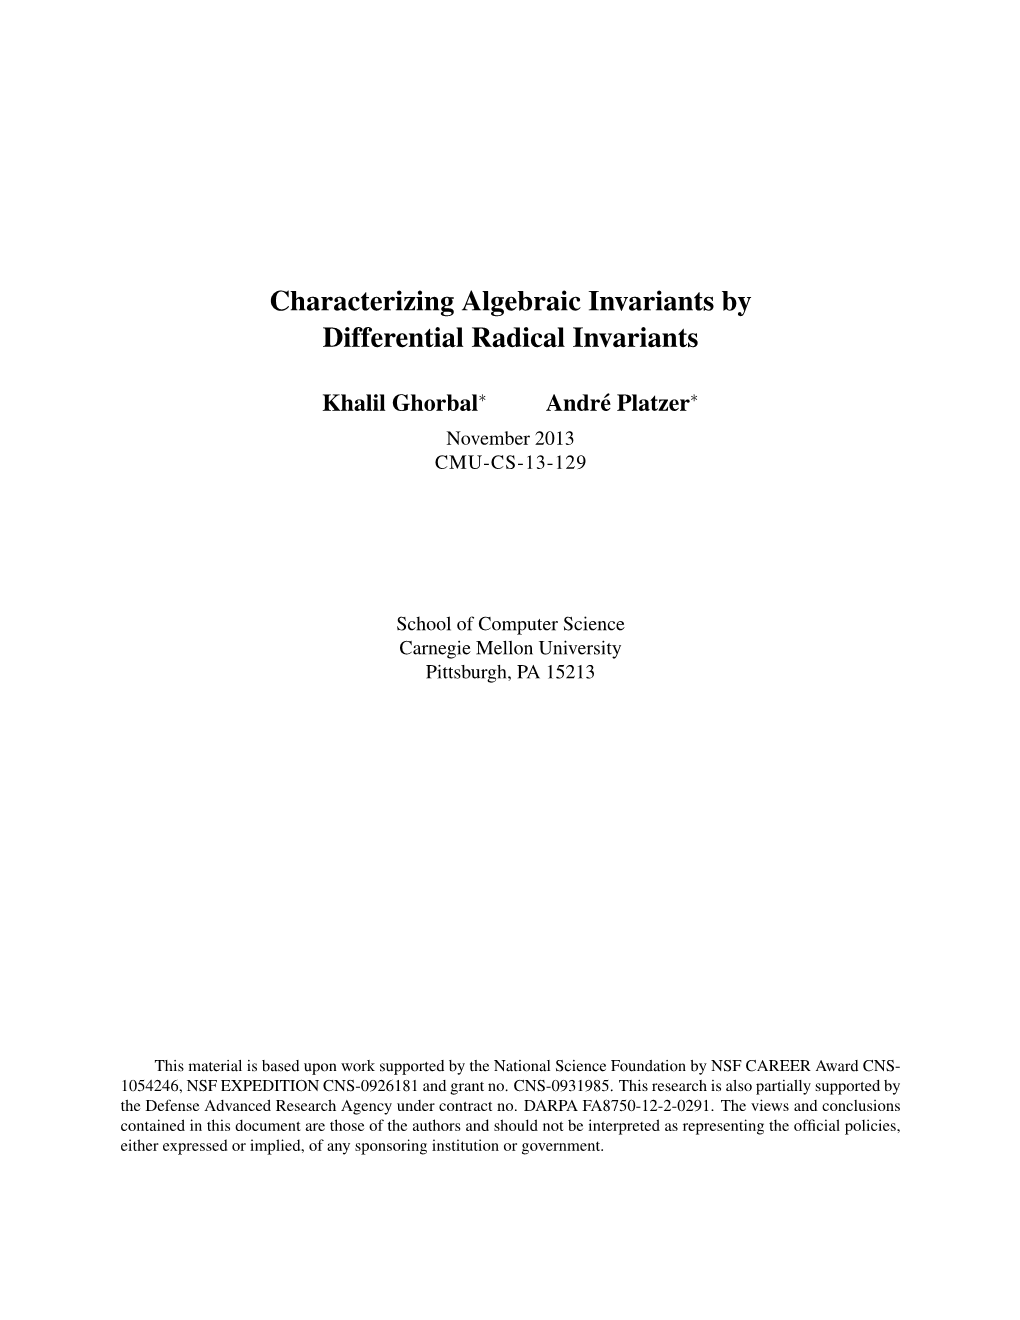 Characterizing Algebraic Invariants by Differential Radical Invariants